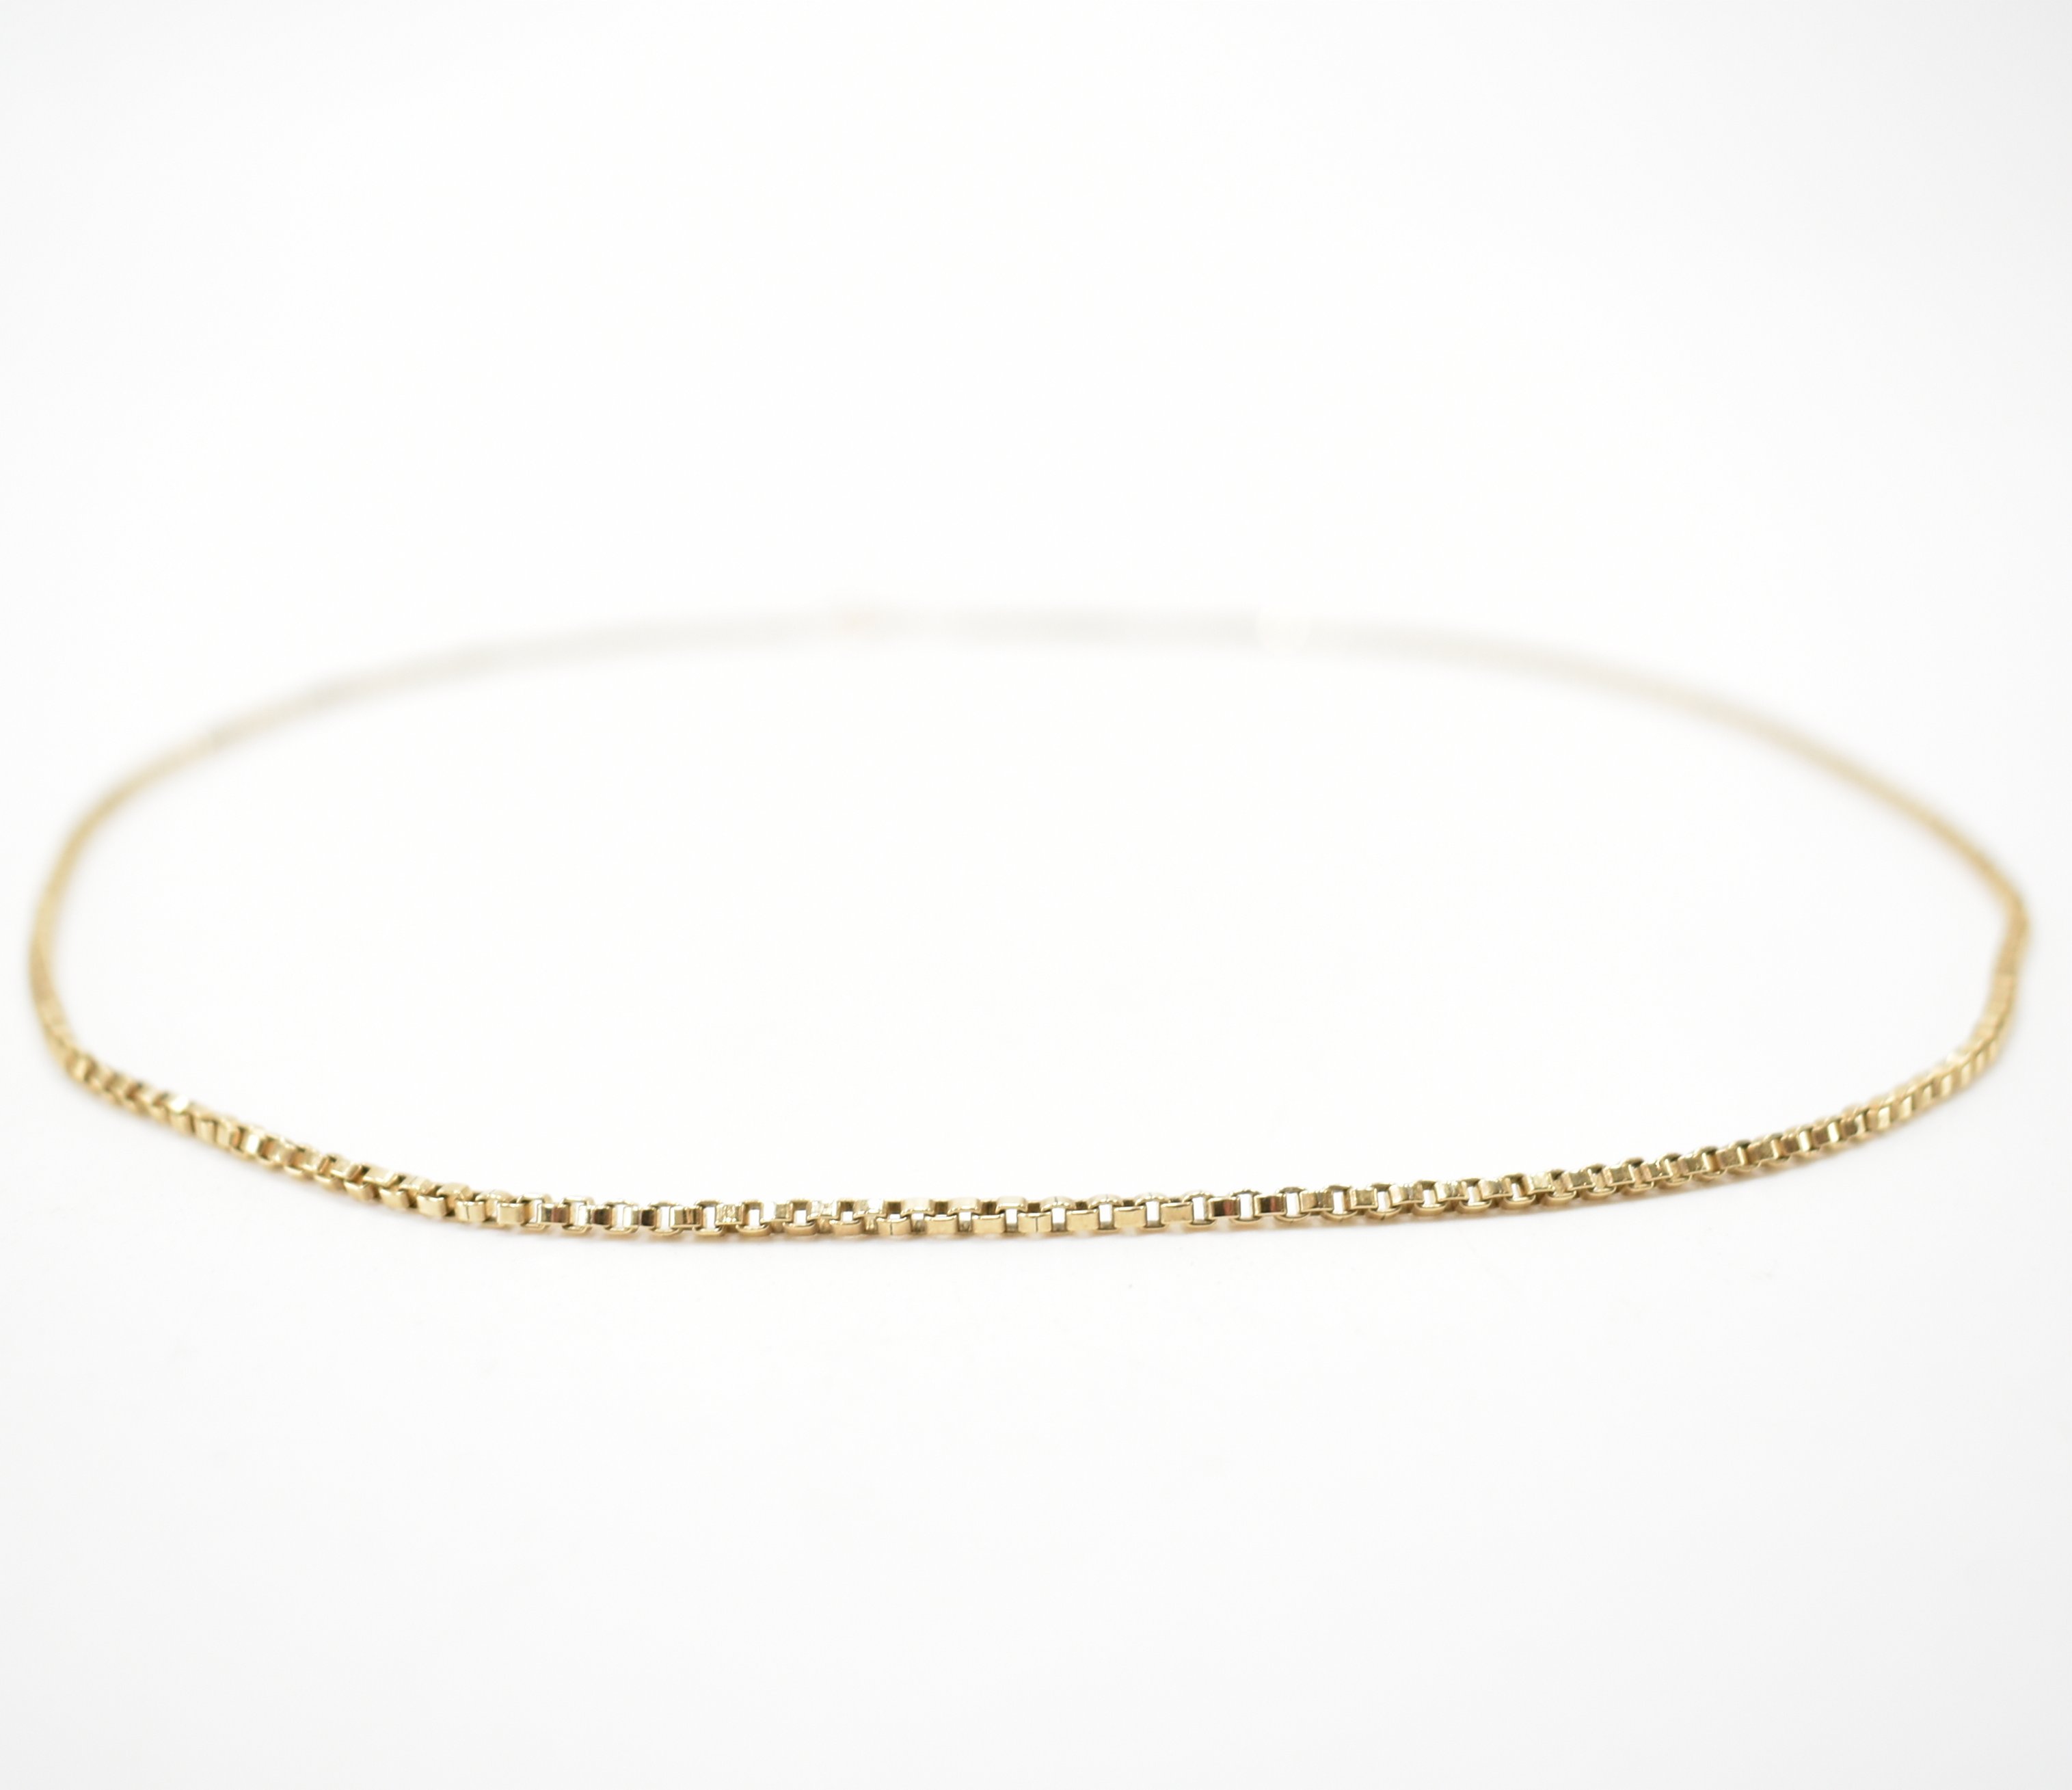 HALLMARKED 9CT BOX CHAIN NECKLACE - Image 2 of 4